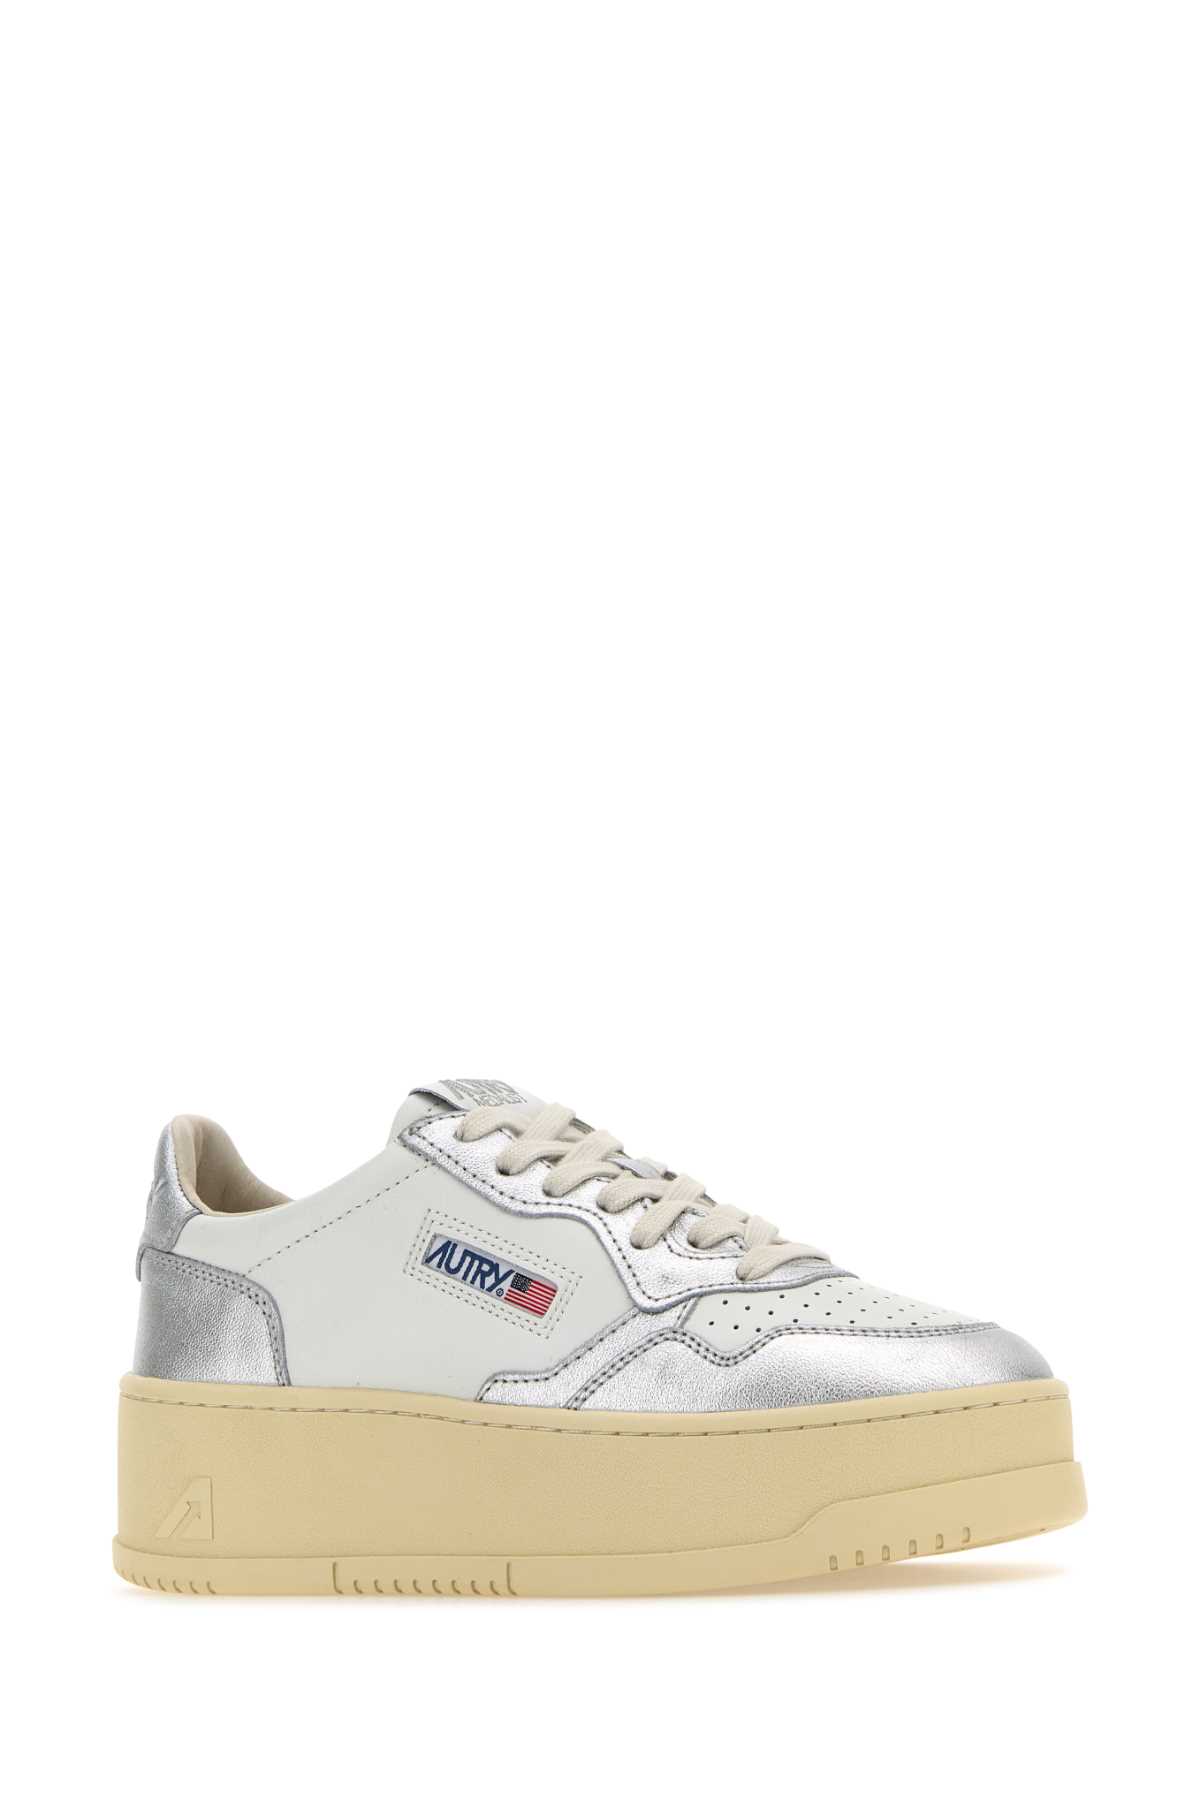 Shop Autry Two-tone Leather Platform Low Wom Sneakers In Whitesilver